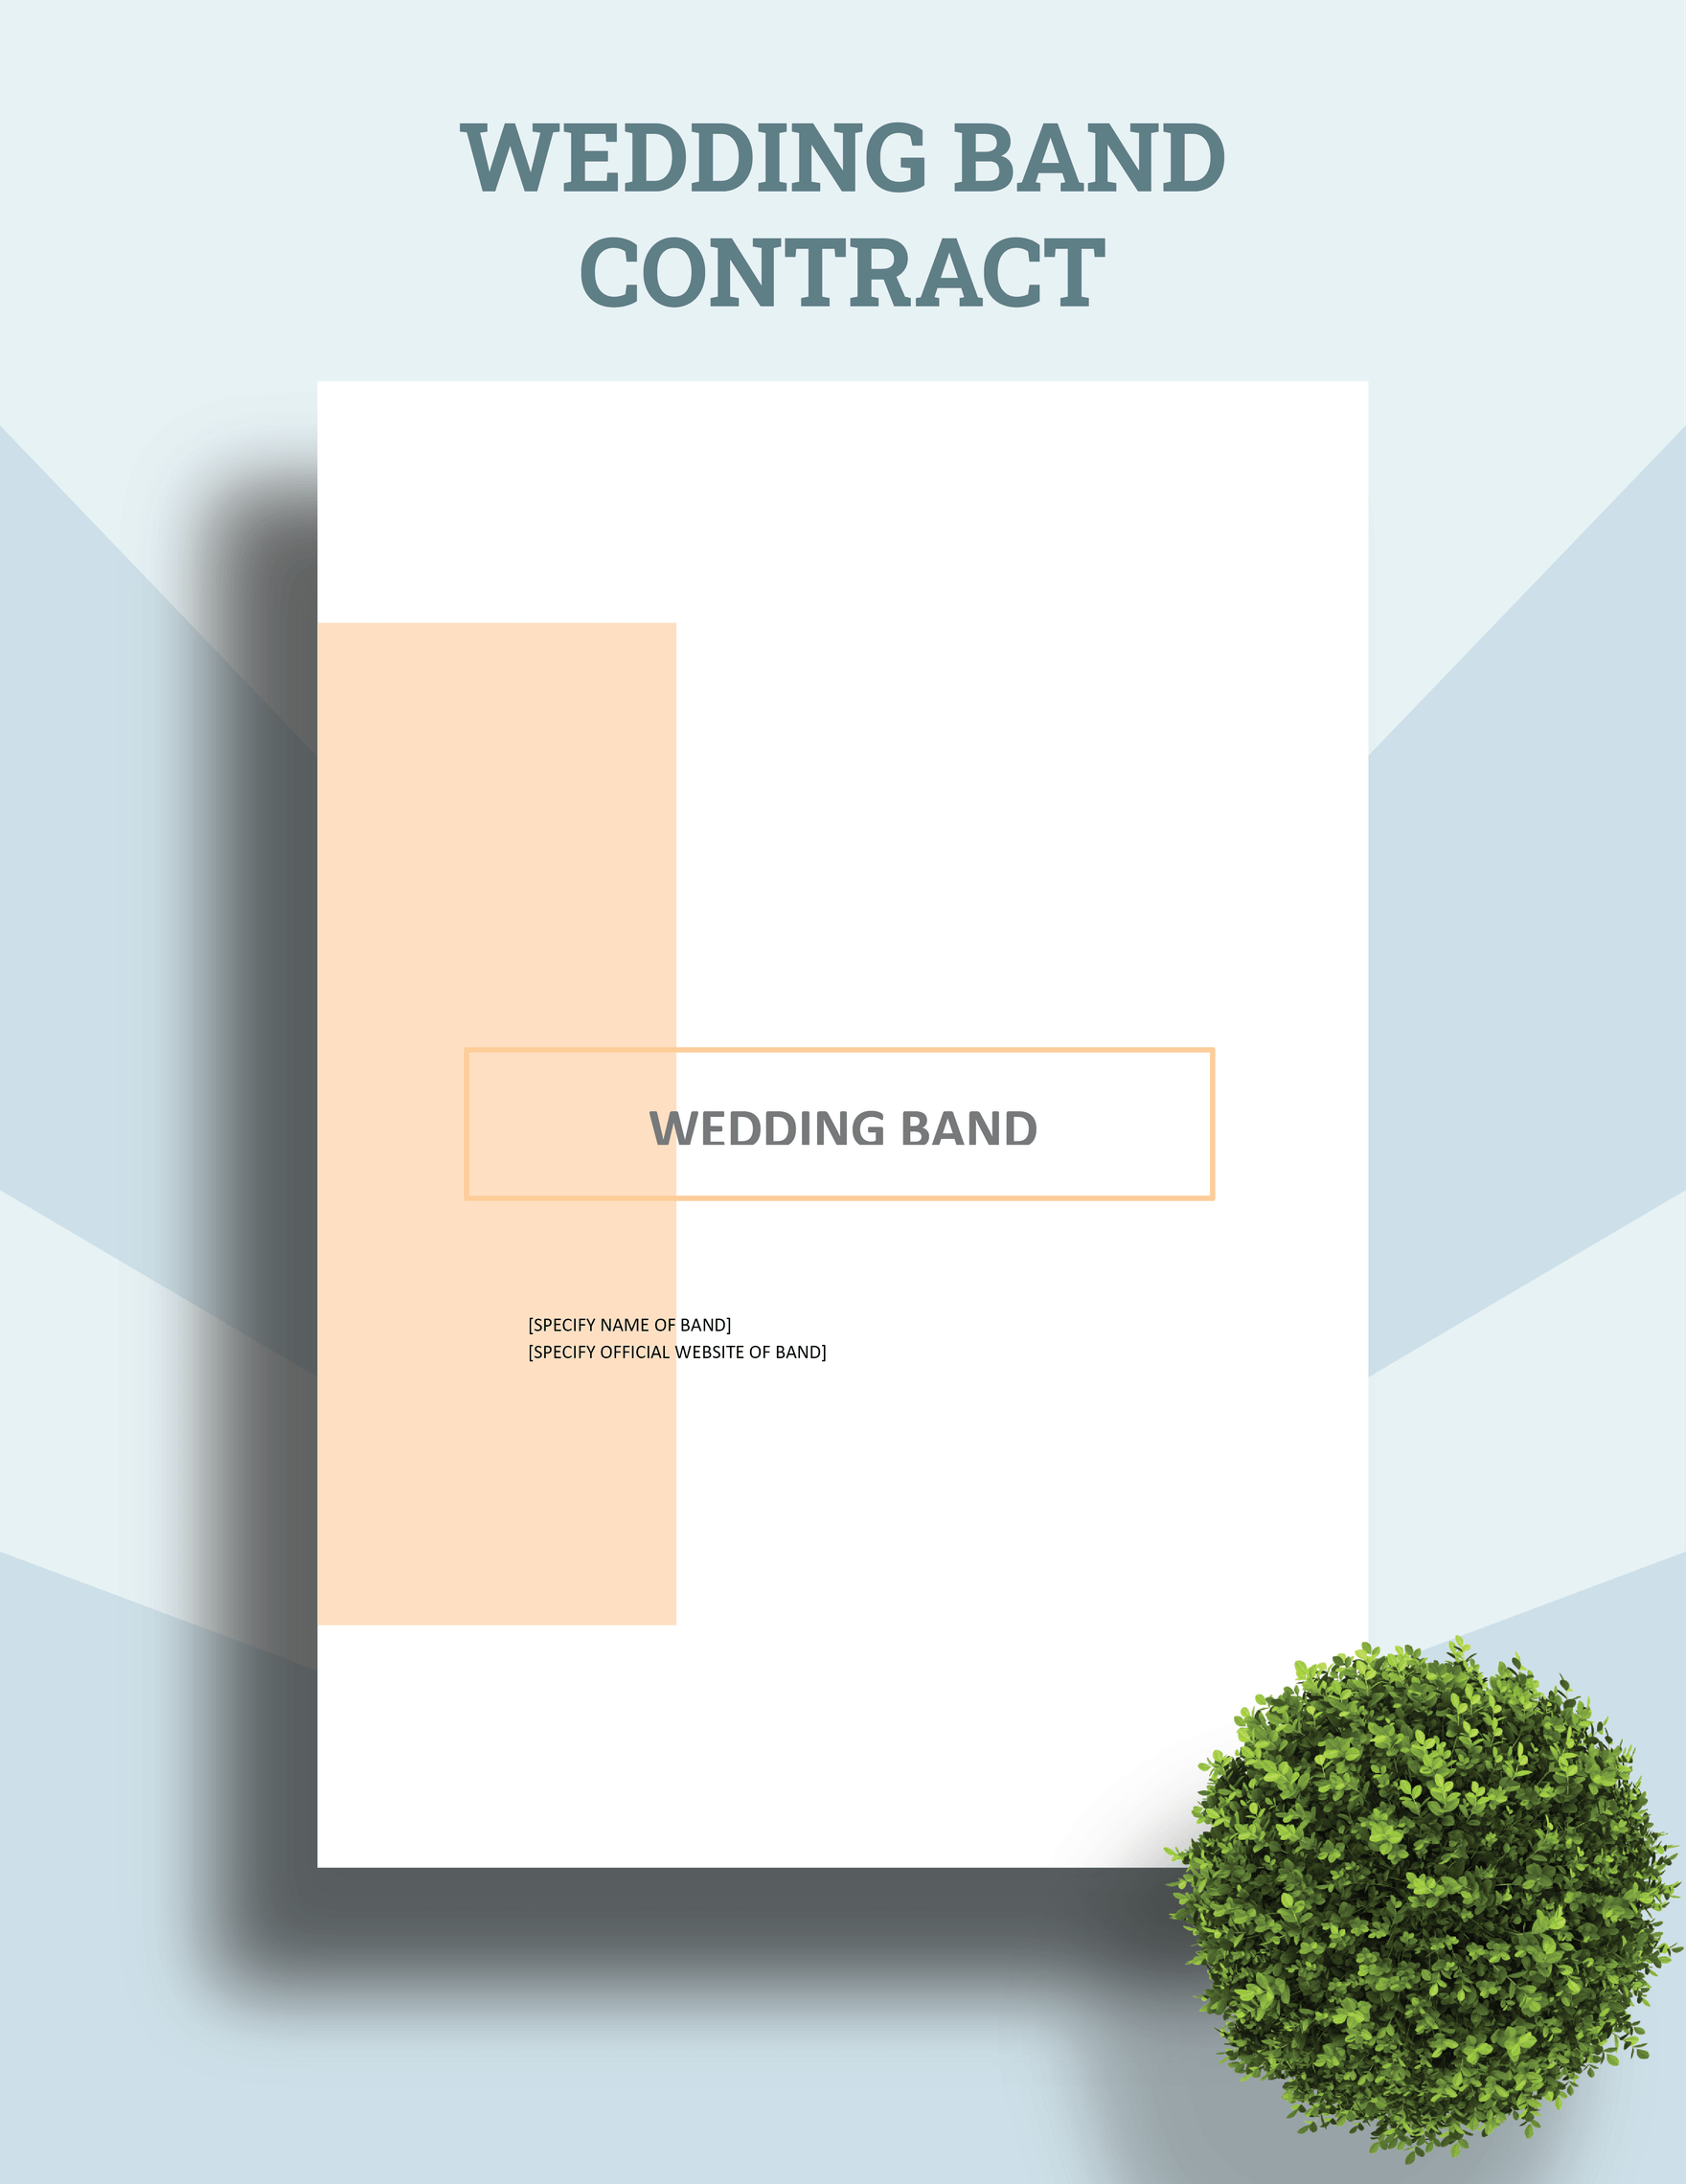 Wedding Band Contract Template in Word, Google Docs, Apple Pages